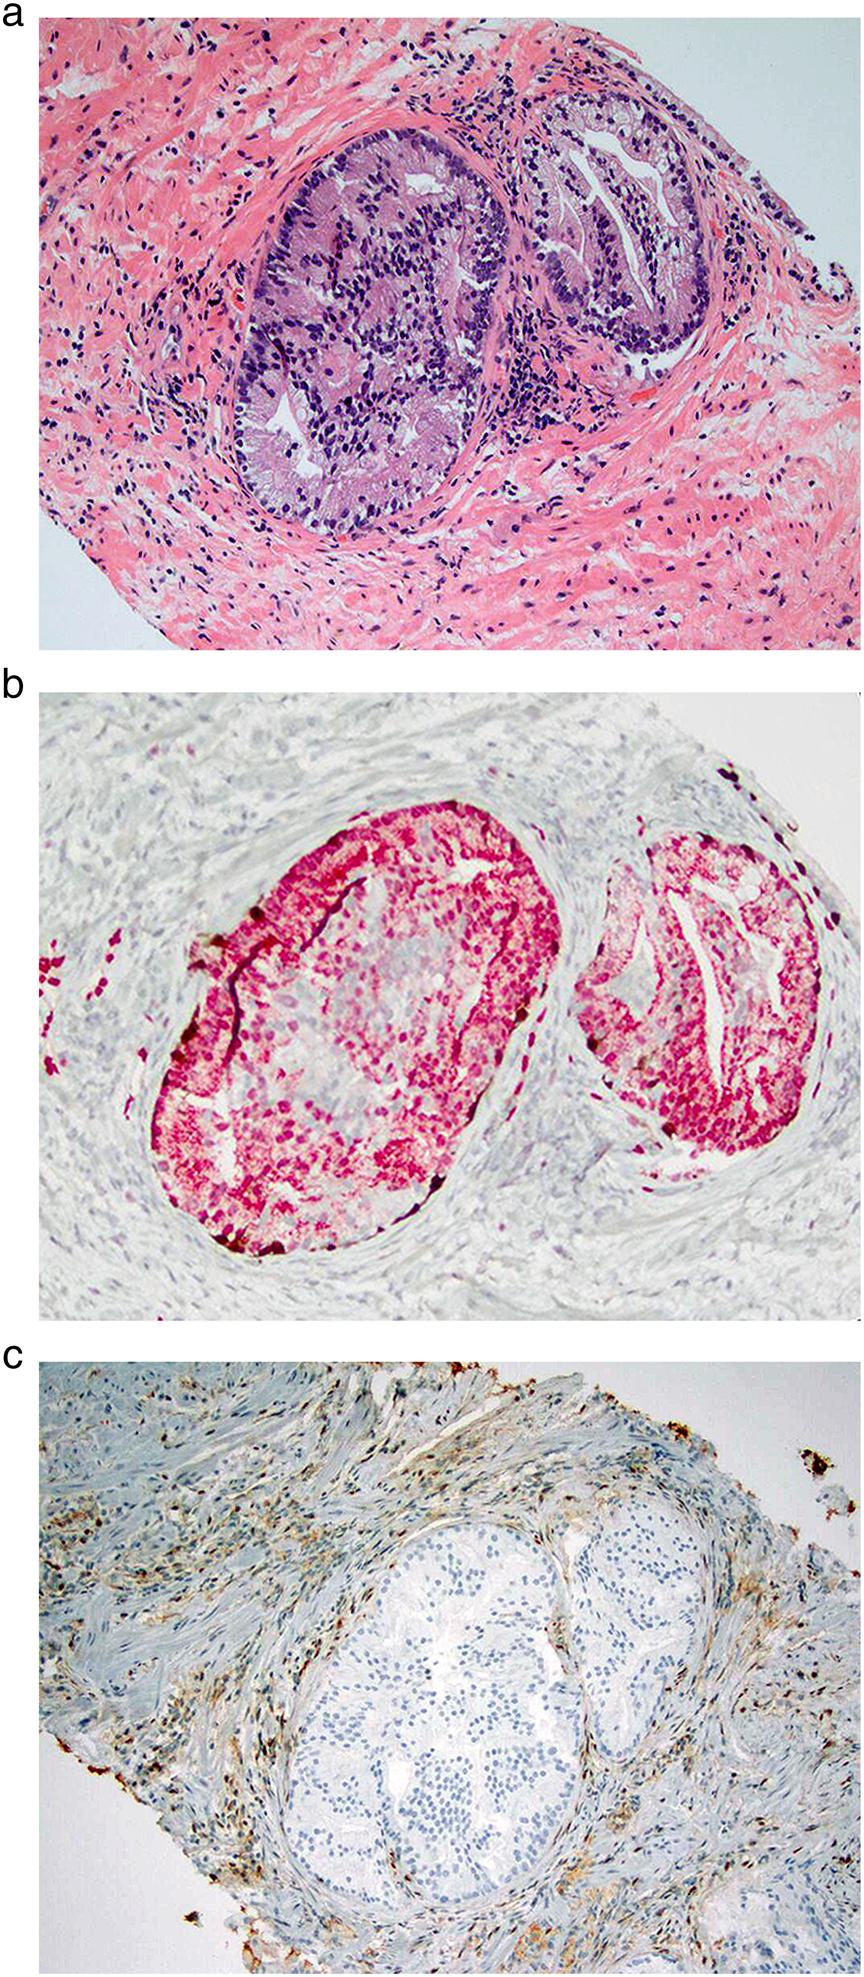 268 R. B. Shah and M. Zhou Reporting of tertiary pattern 5 in the biopsy and prostatectomy specimens Prostate cancer often contains >2 Gleason patterns within the same tumor.